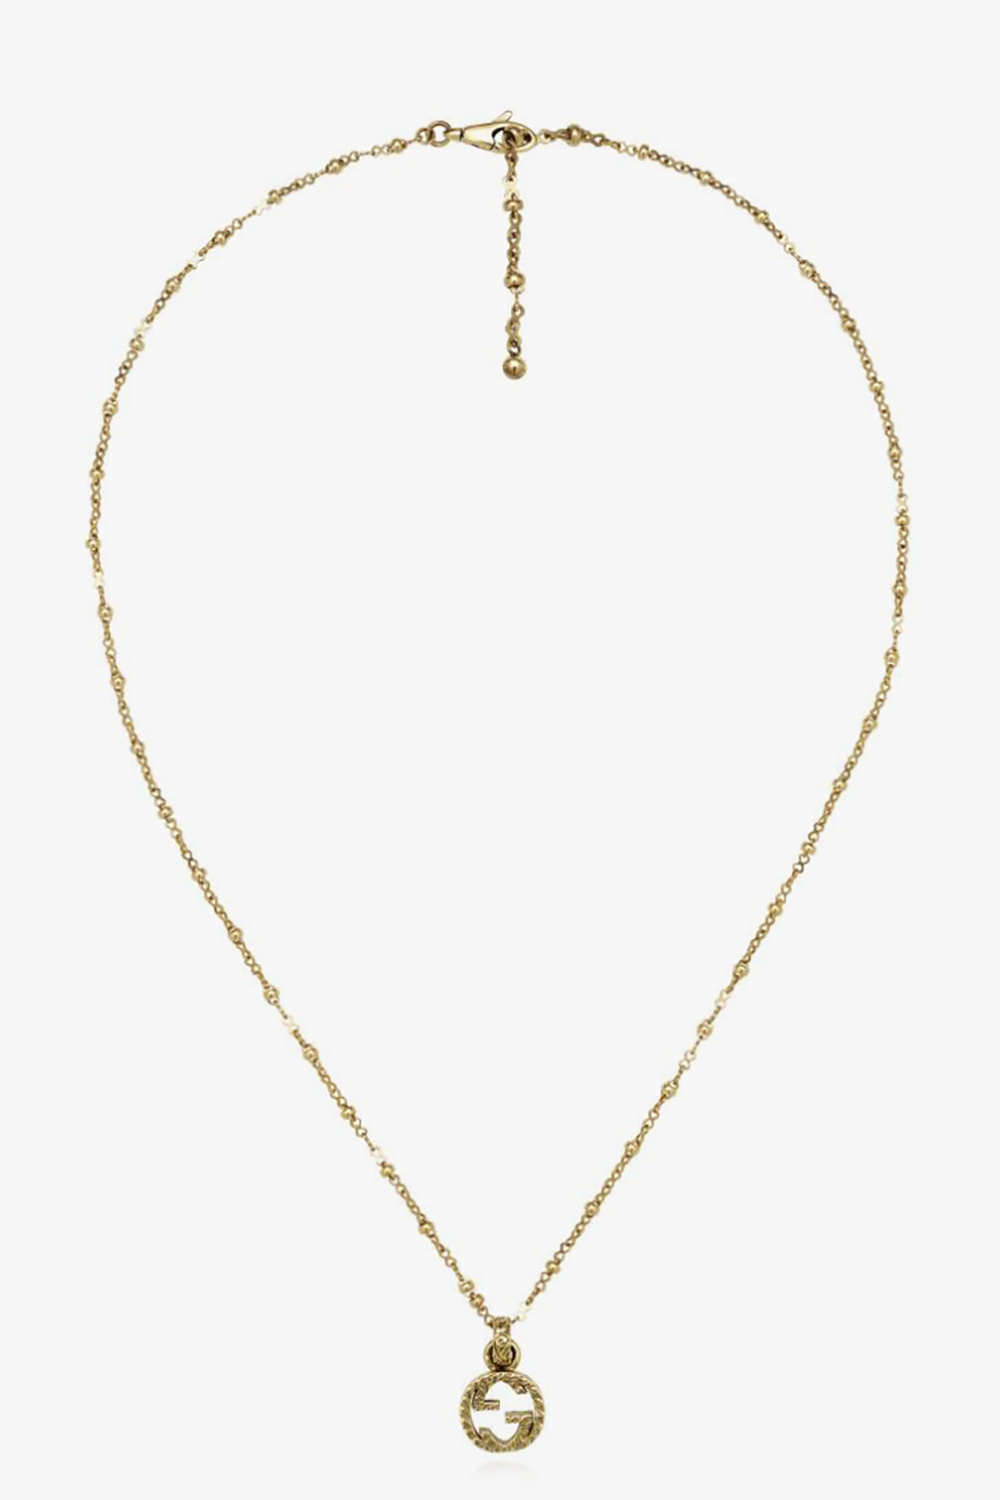 gucci Soft Yellow gold necklace